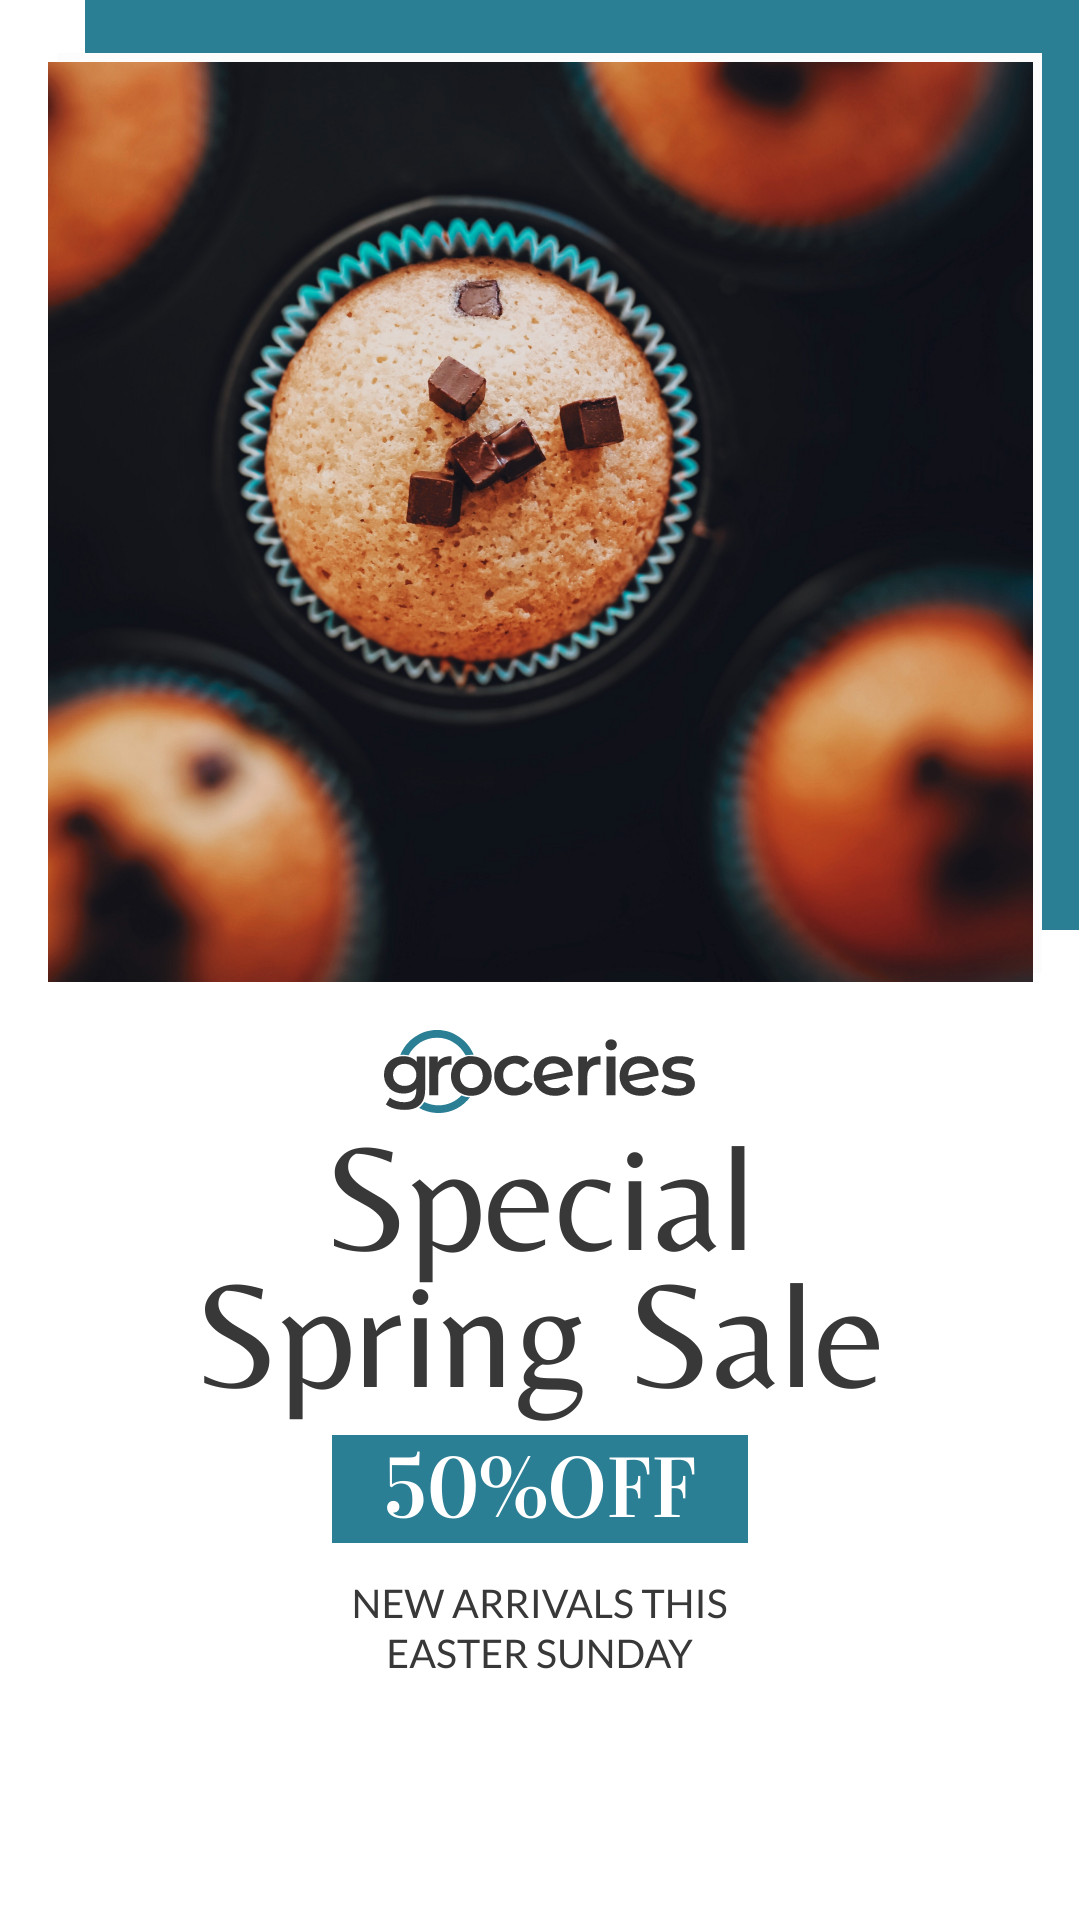 Special Muffin Spring Easter Sale